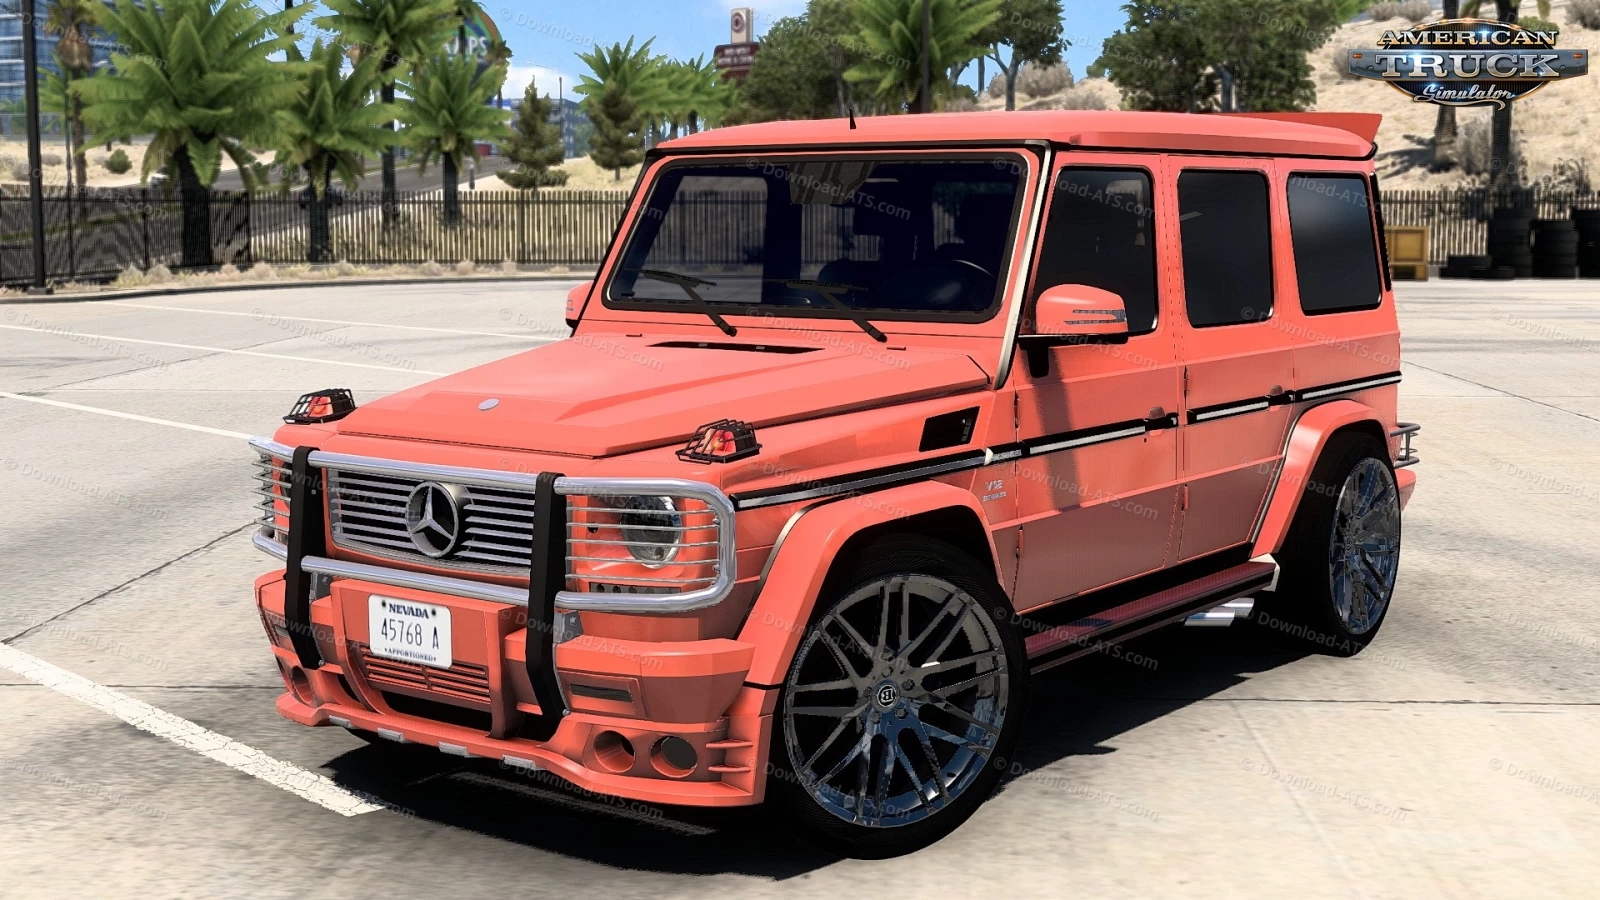 Mercedes-Benz W463 2012 G65 AMG v4.4 (1.45.x) for ATS